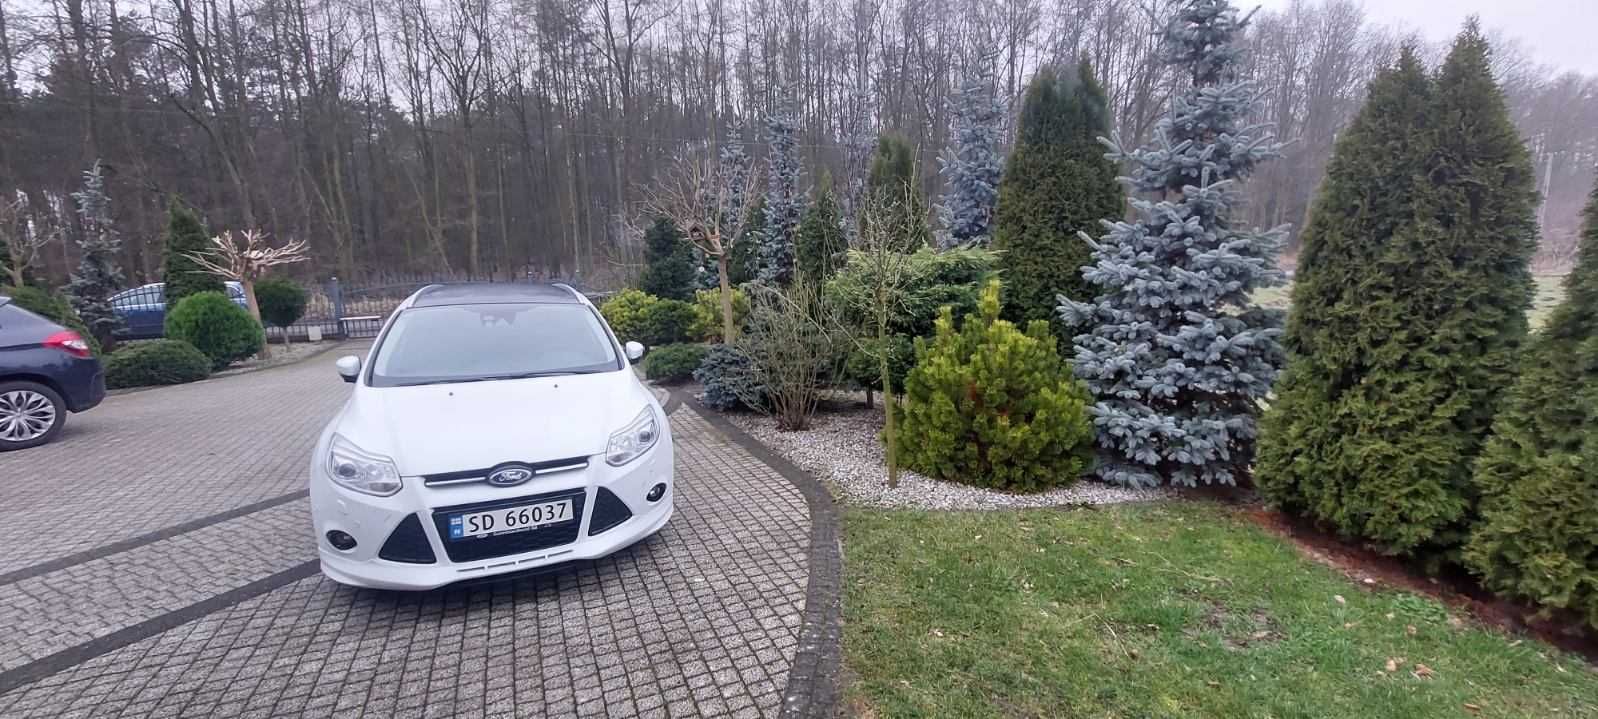 Ford Focus 2013 1,1 125 KM